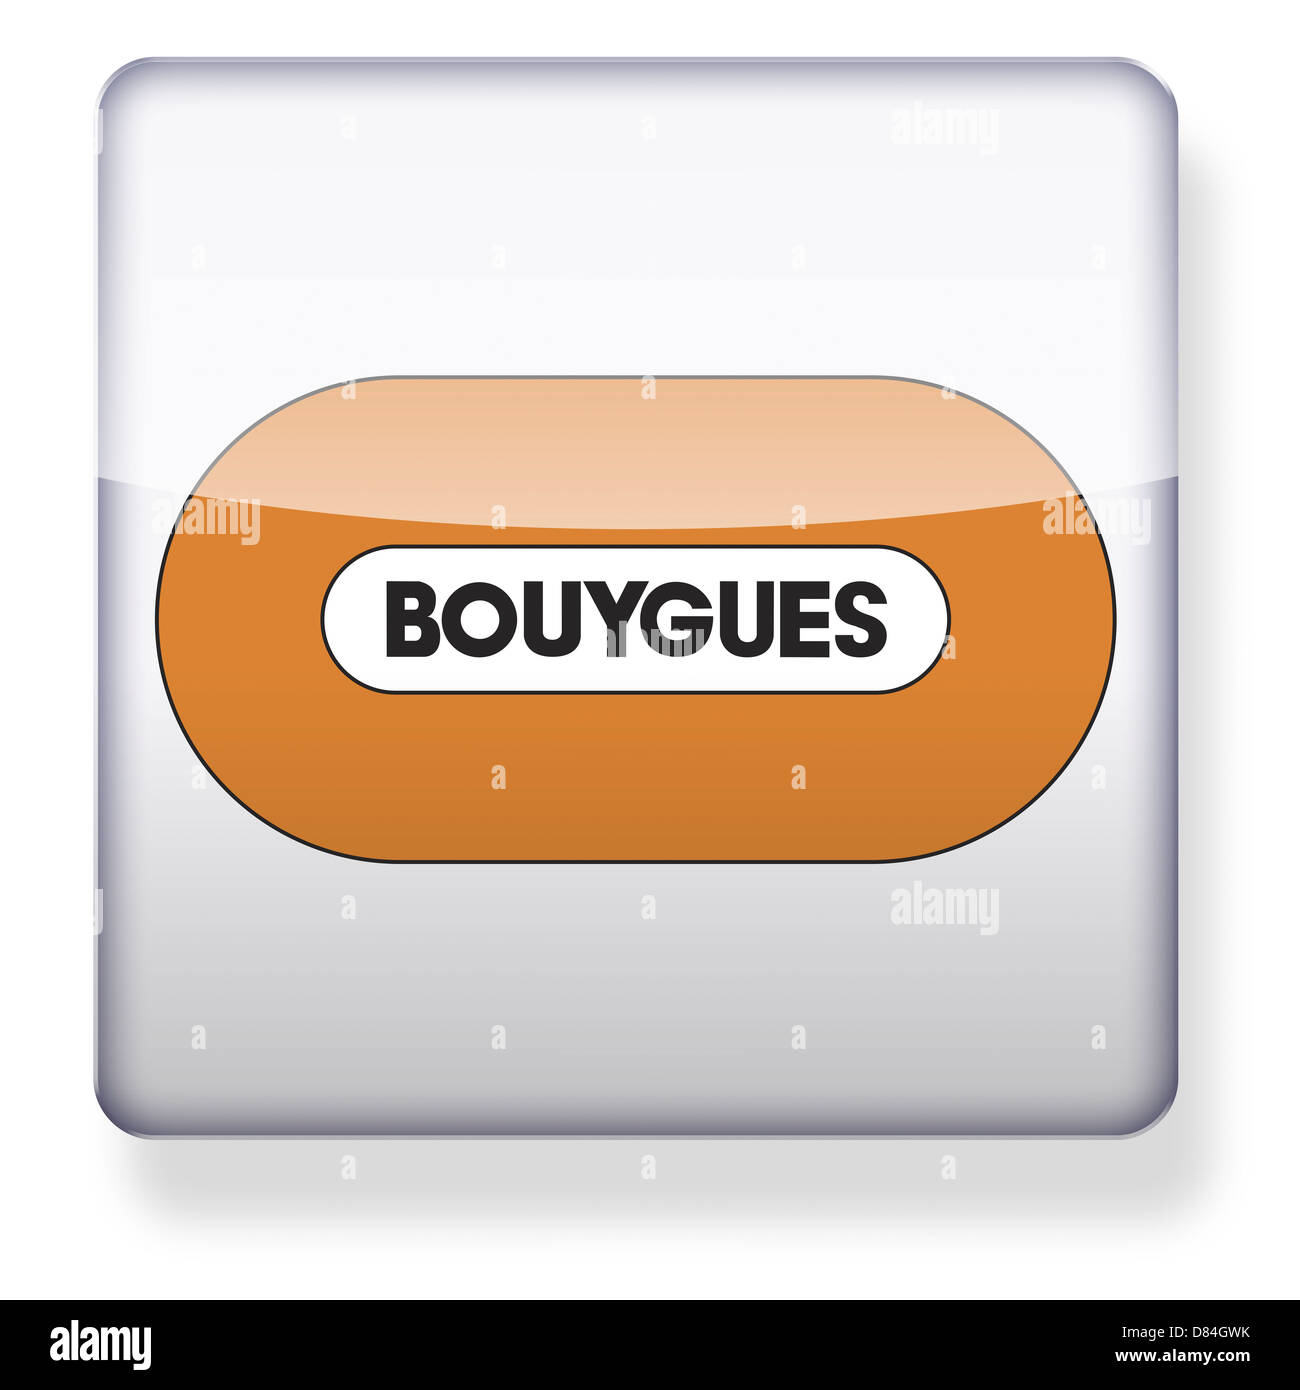 Bouygues logo as an app icon. Clipping path included. Stock Photo